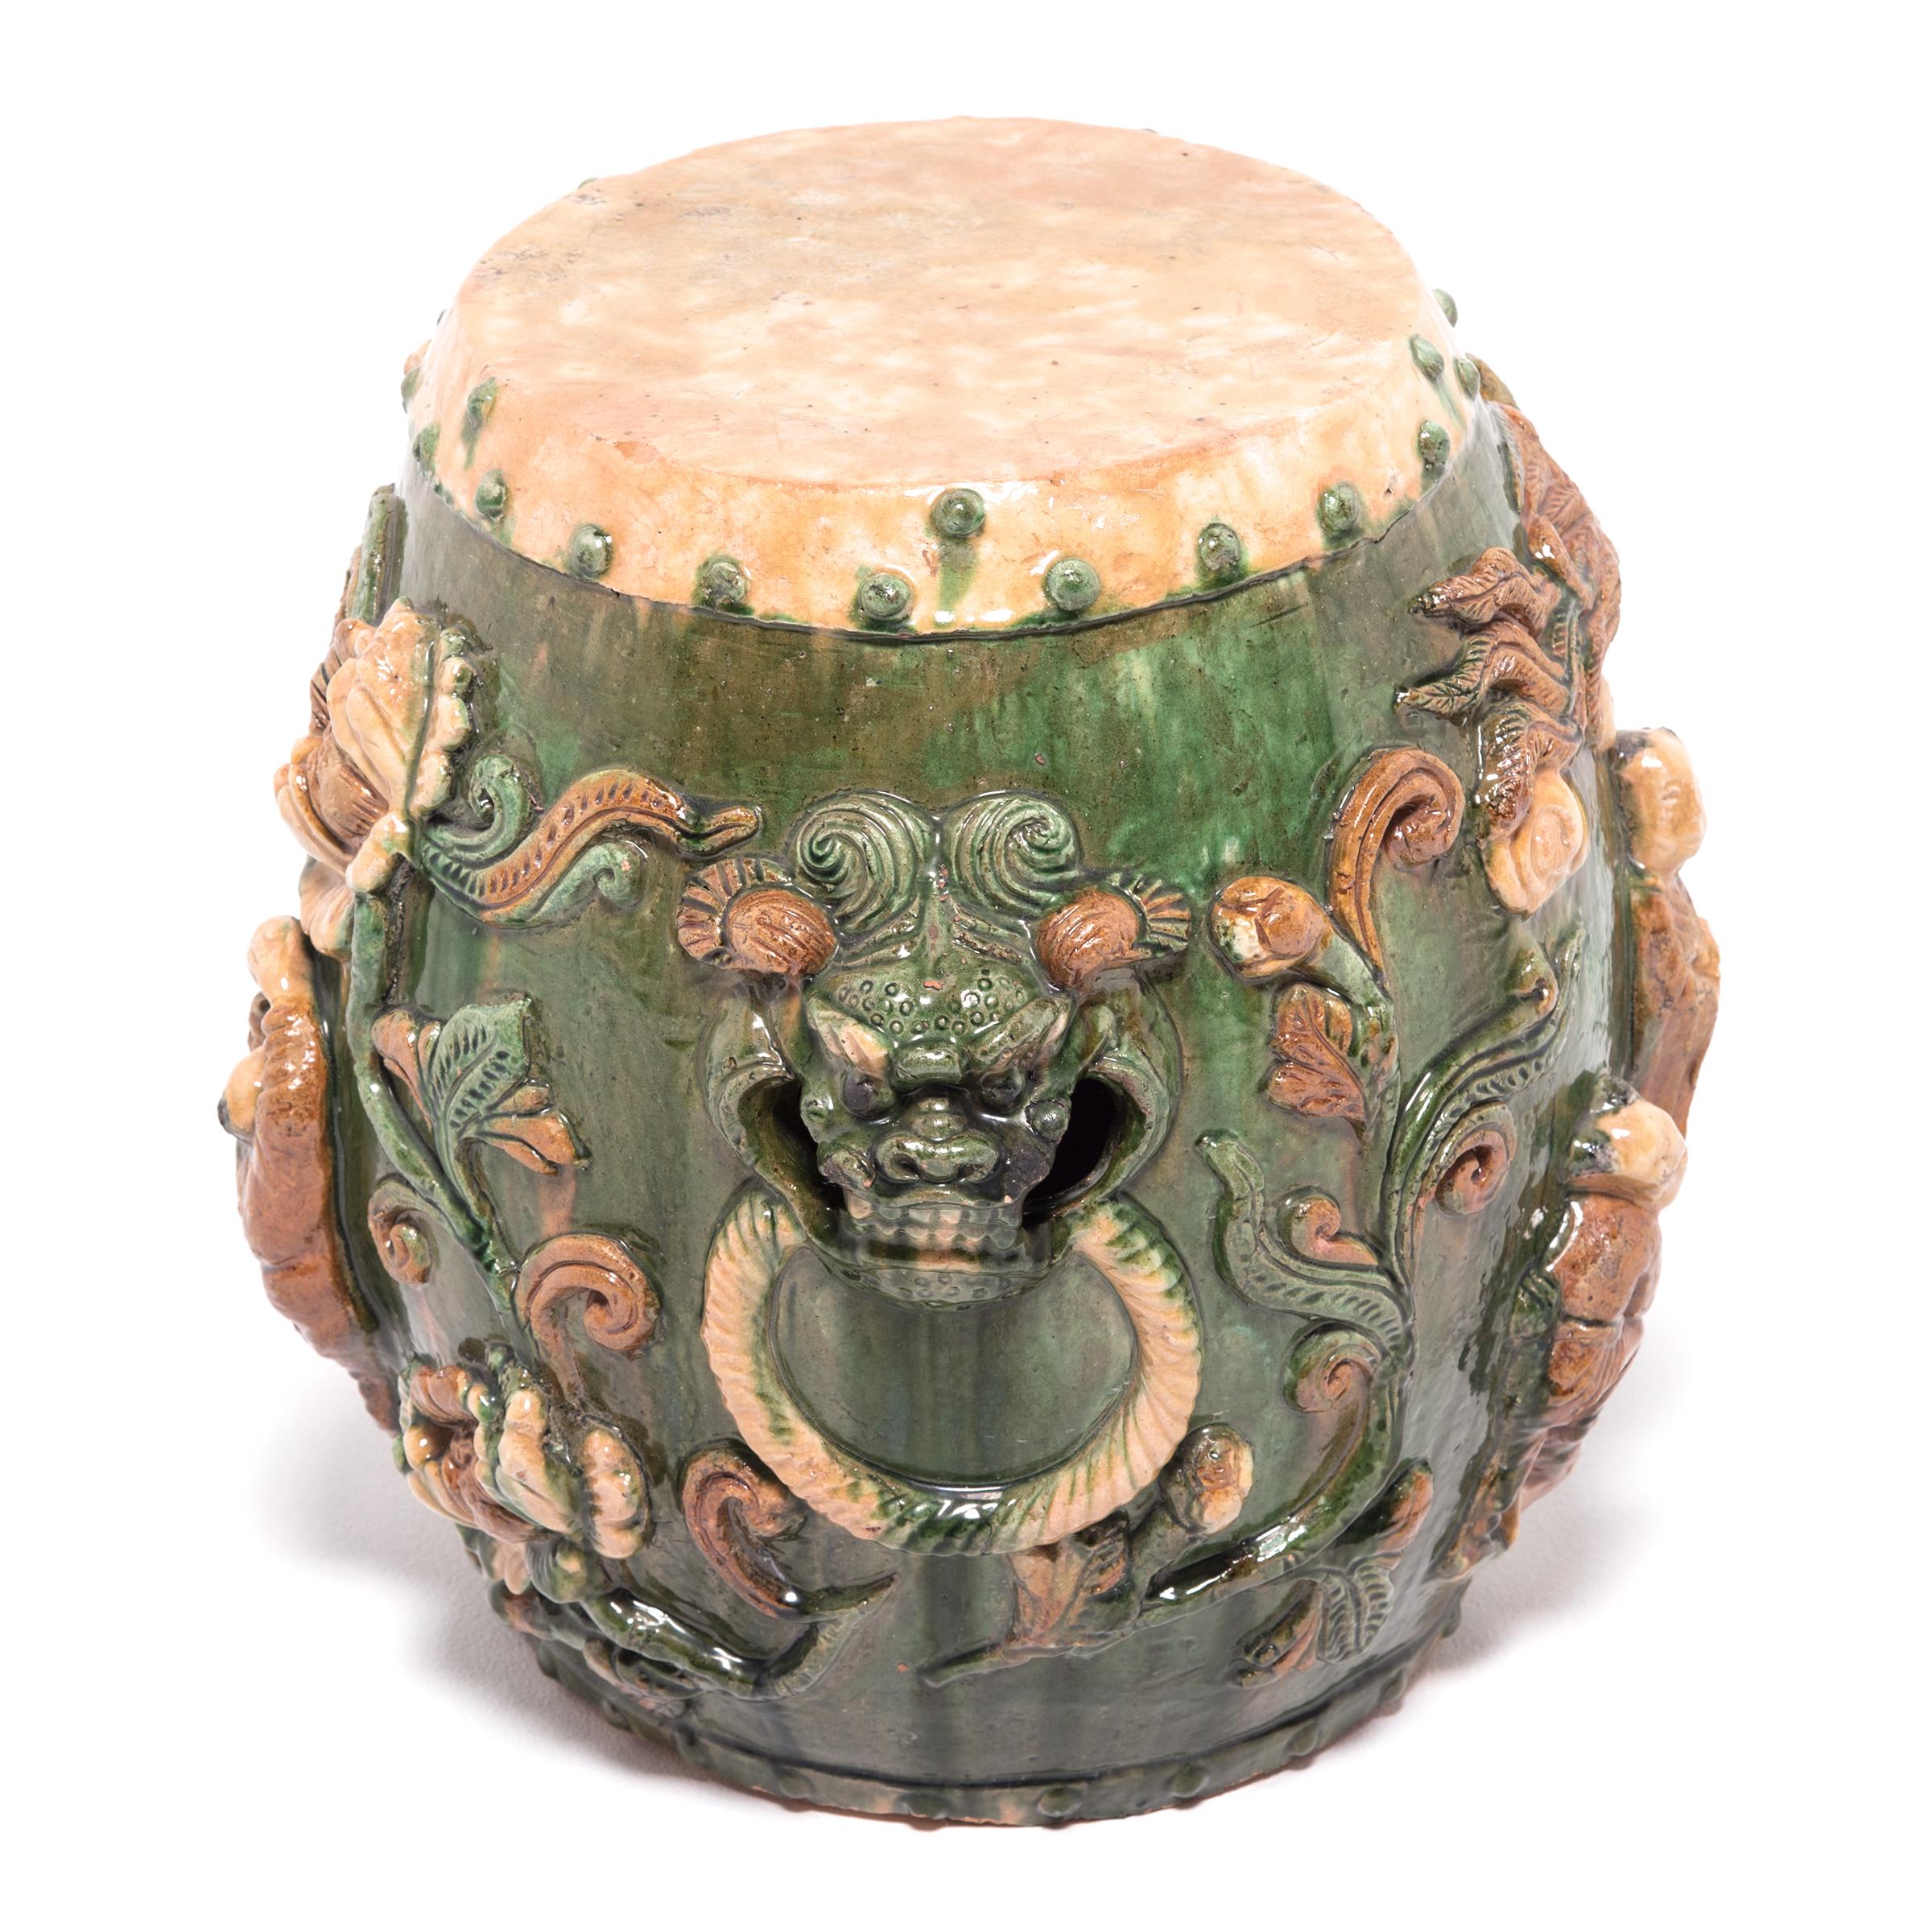 Ornately decorated in high relief, this ceramic drum stool is an expressive example of sancai, or “three colors,” ware. This technique was developed during the Tang dynasty and typically combines green, cream and amber glazes. During firing, the